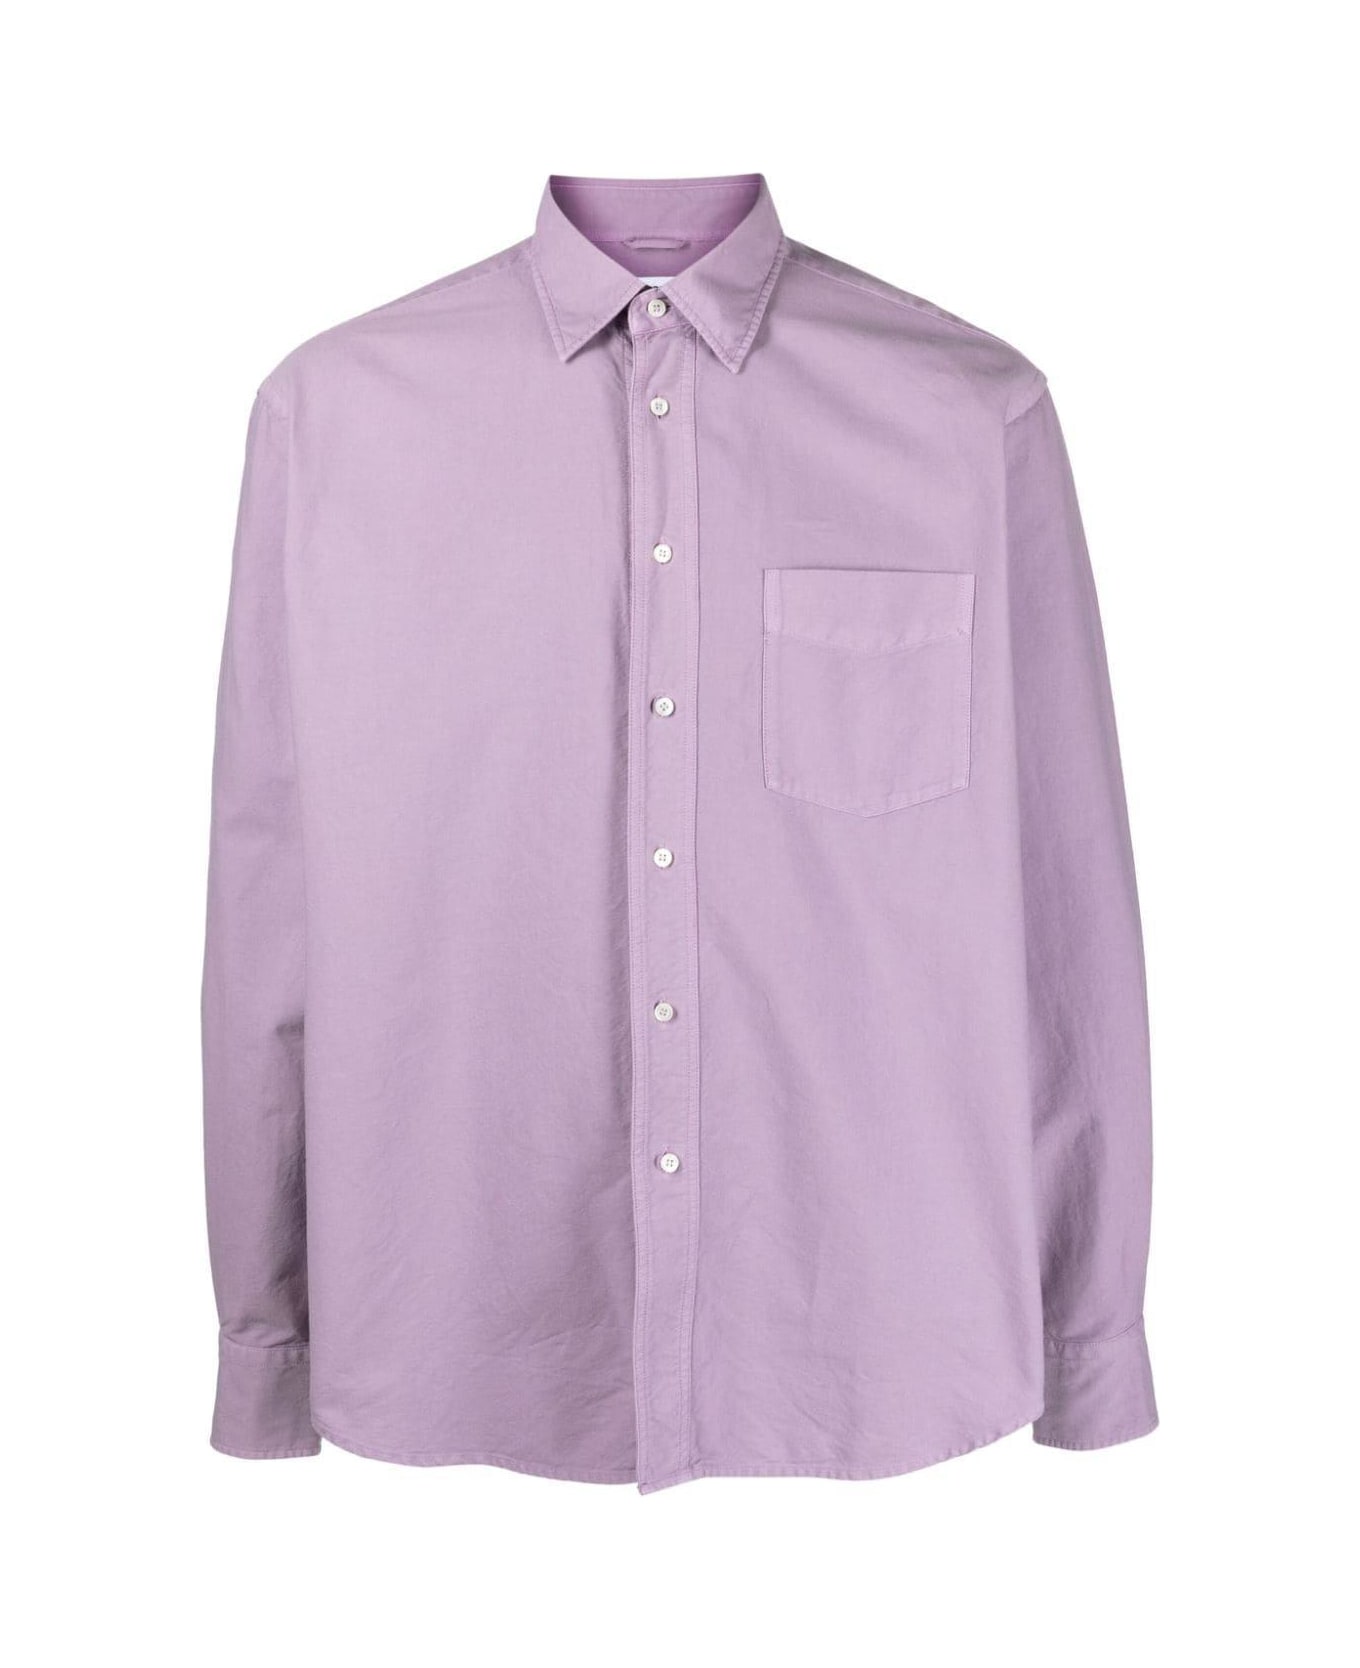 Aspesi Collared Buttoned Shirt - Lilac シャツ